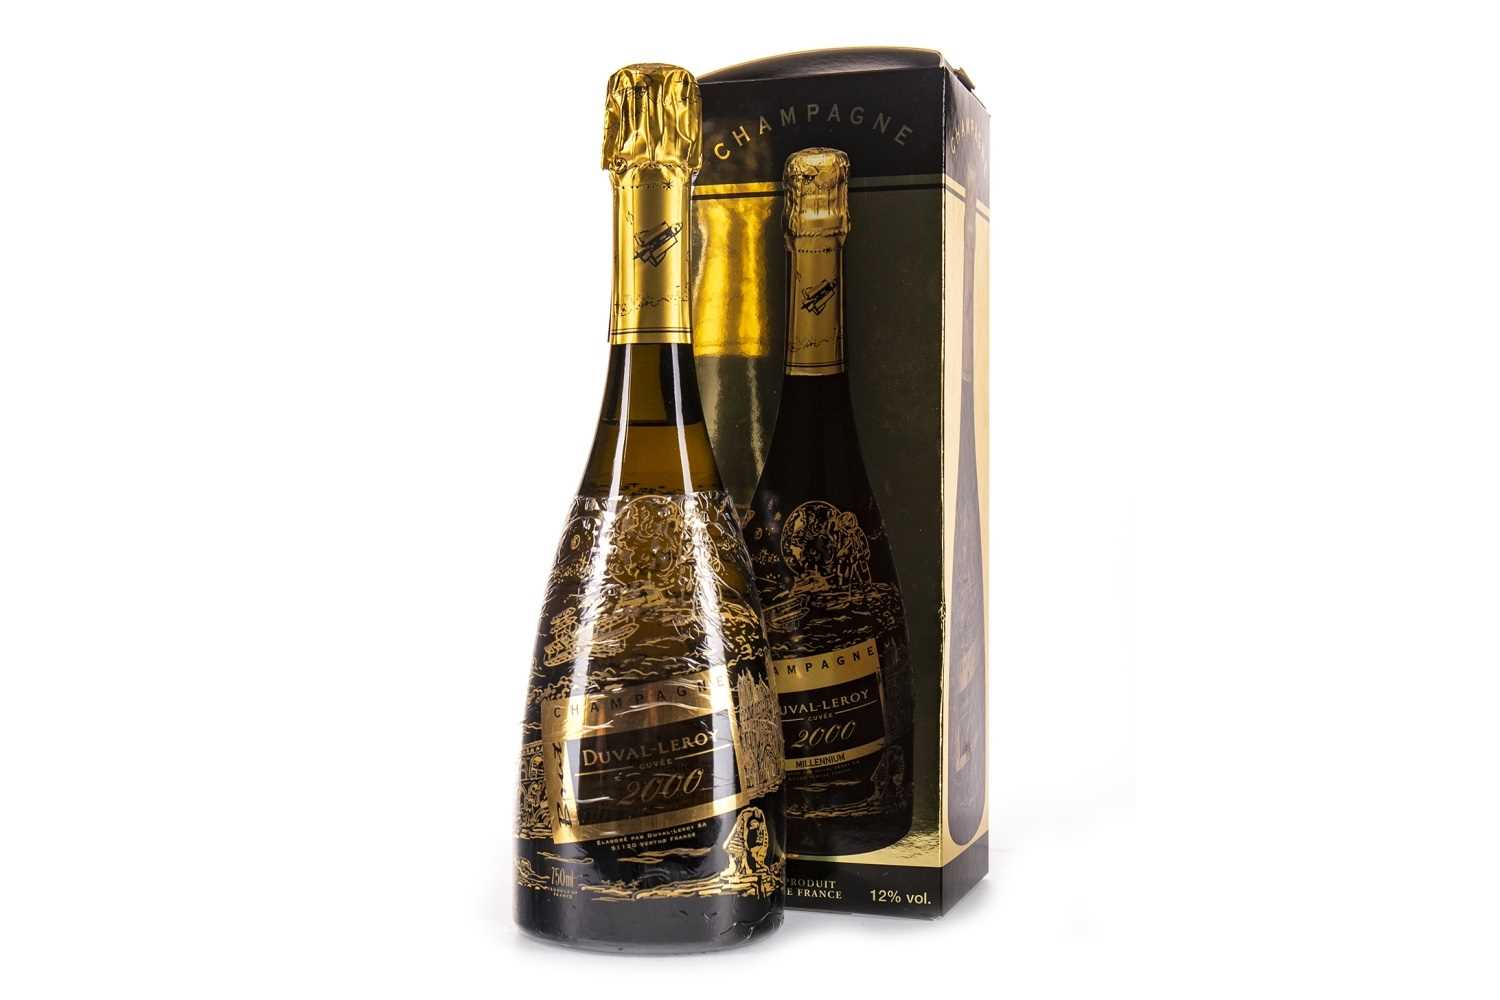 Lot 2011 - DUVAL-LEROY 2000 Champagne